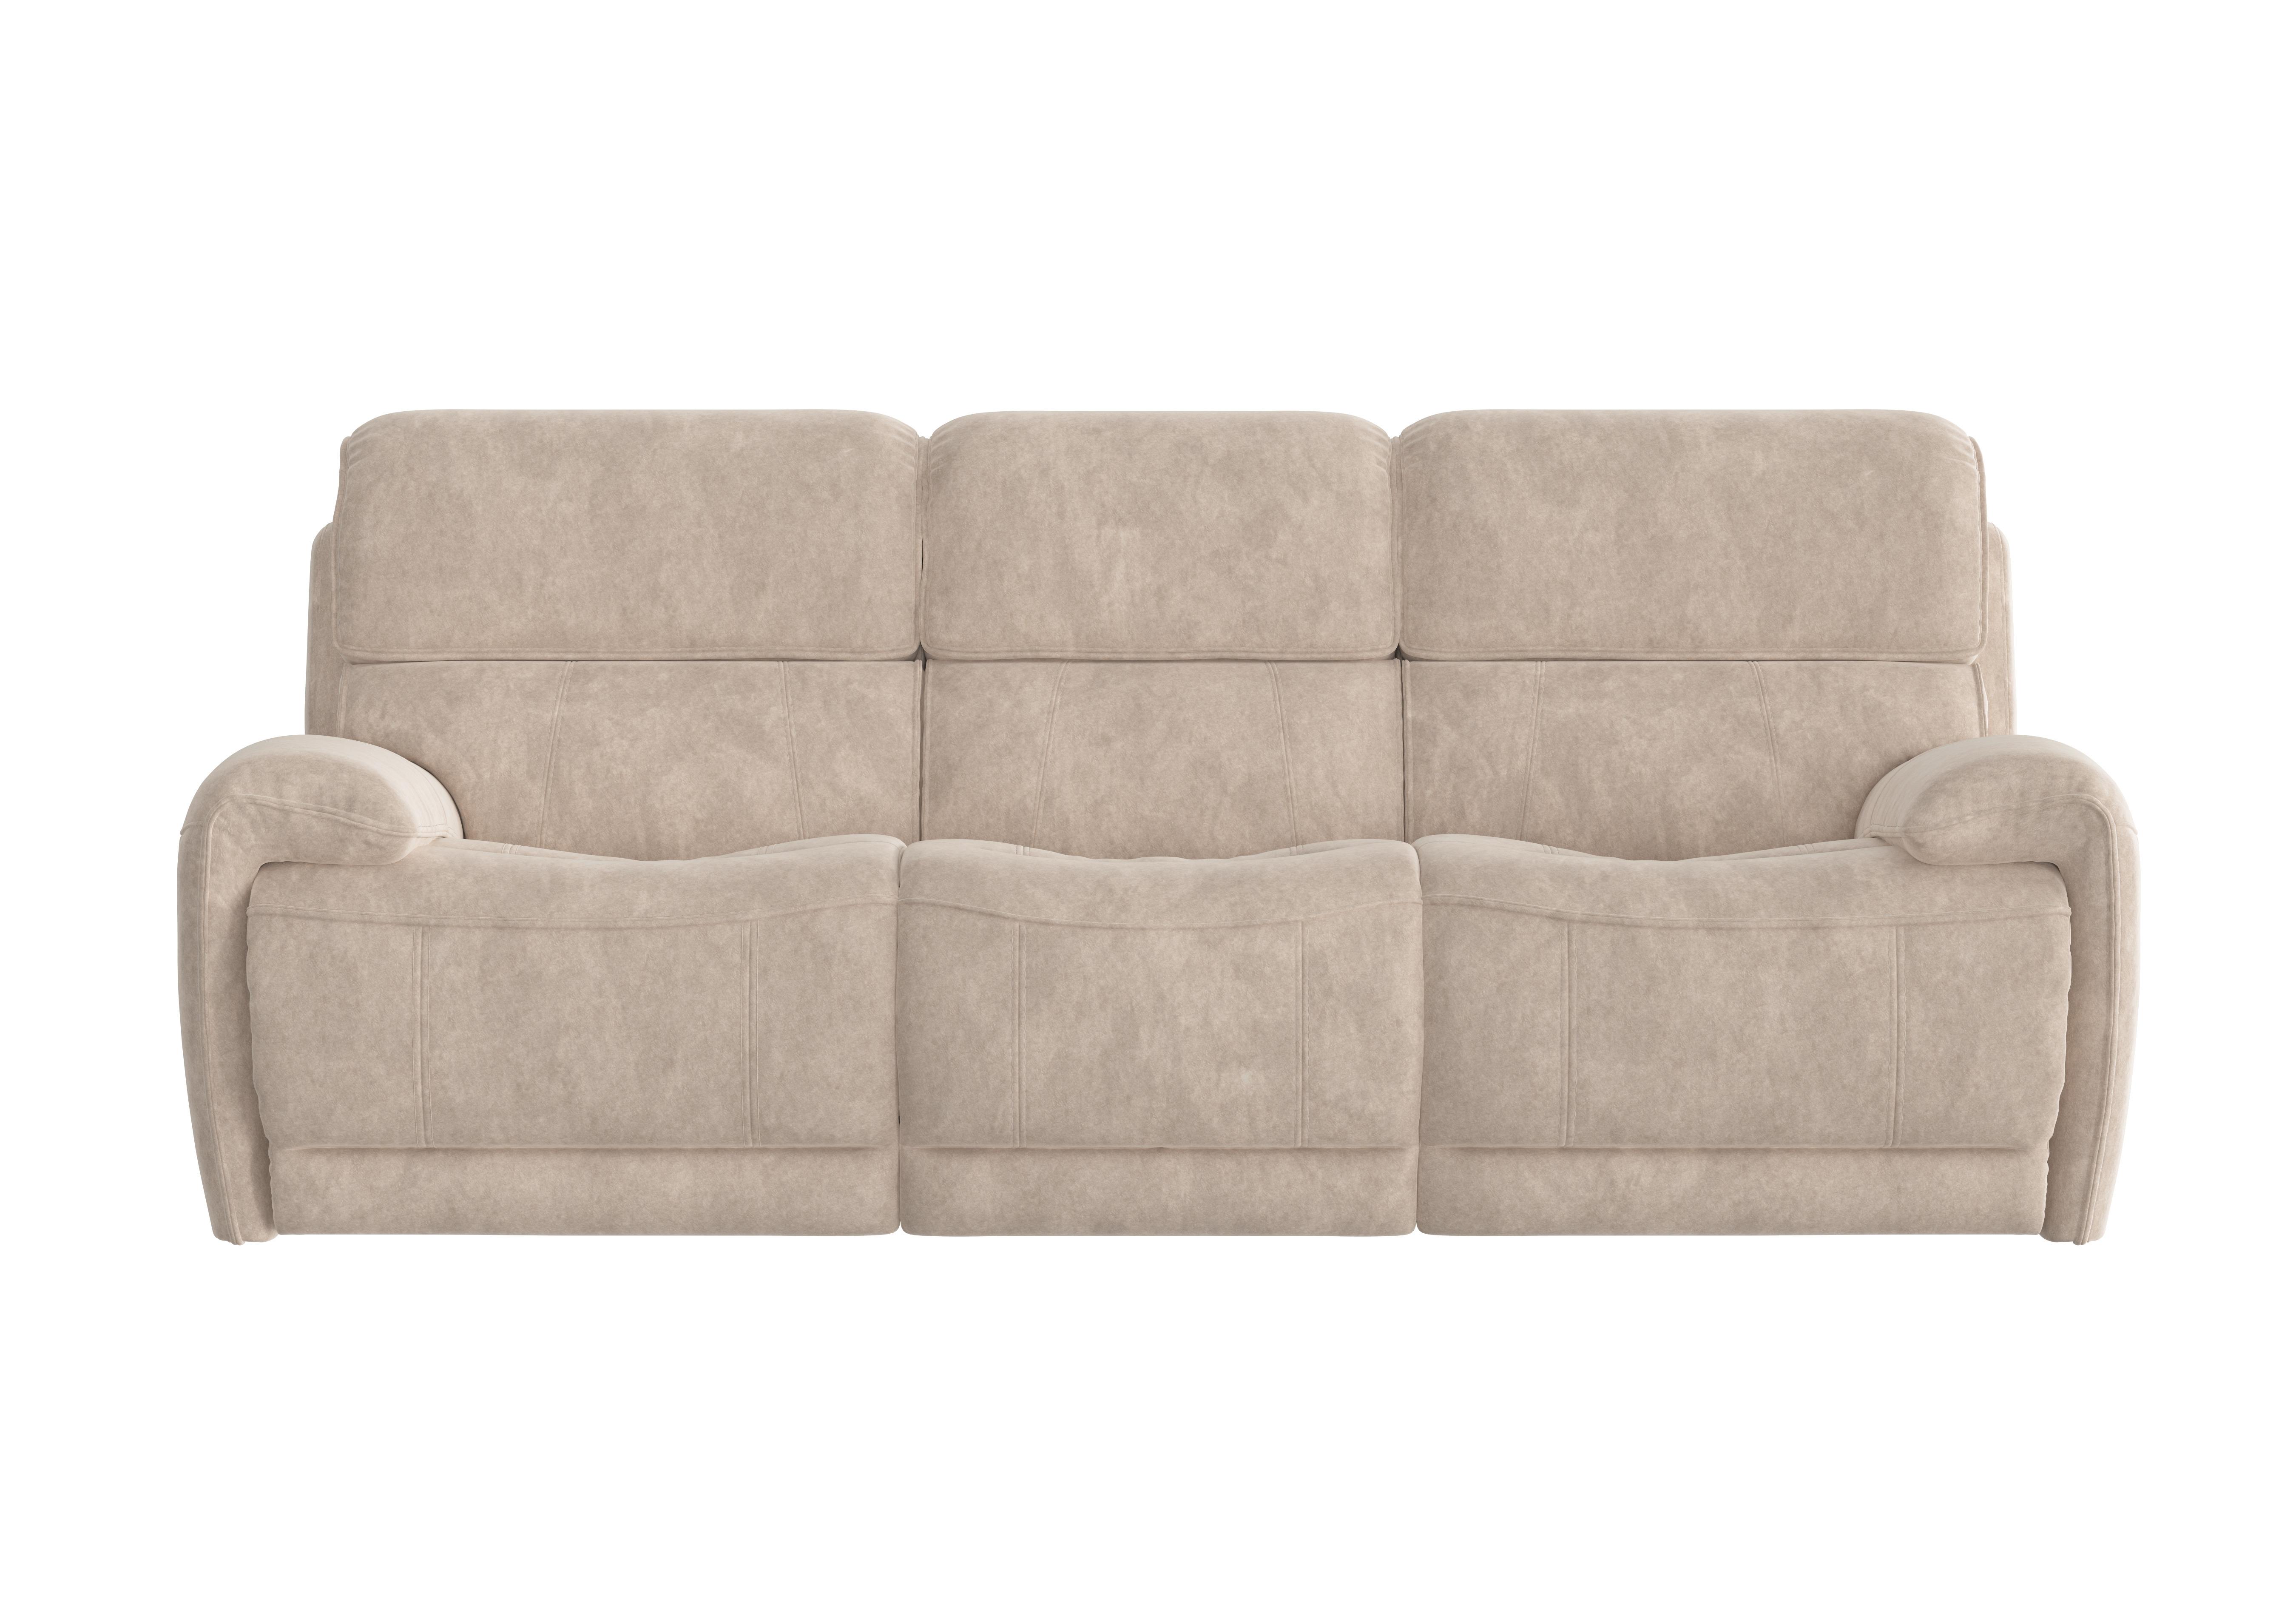 Link 3 Seater Fabric Power Recliner Sofa with Power Headrests in Bfa-Bnn-R26 Fv2 Cream on Furniture Village